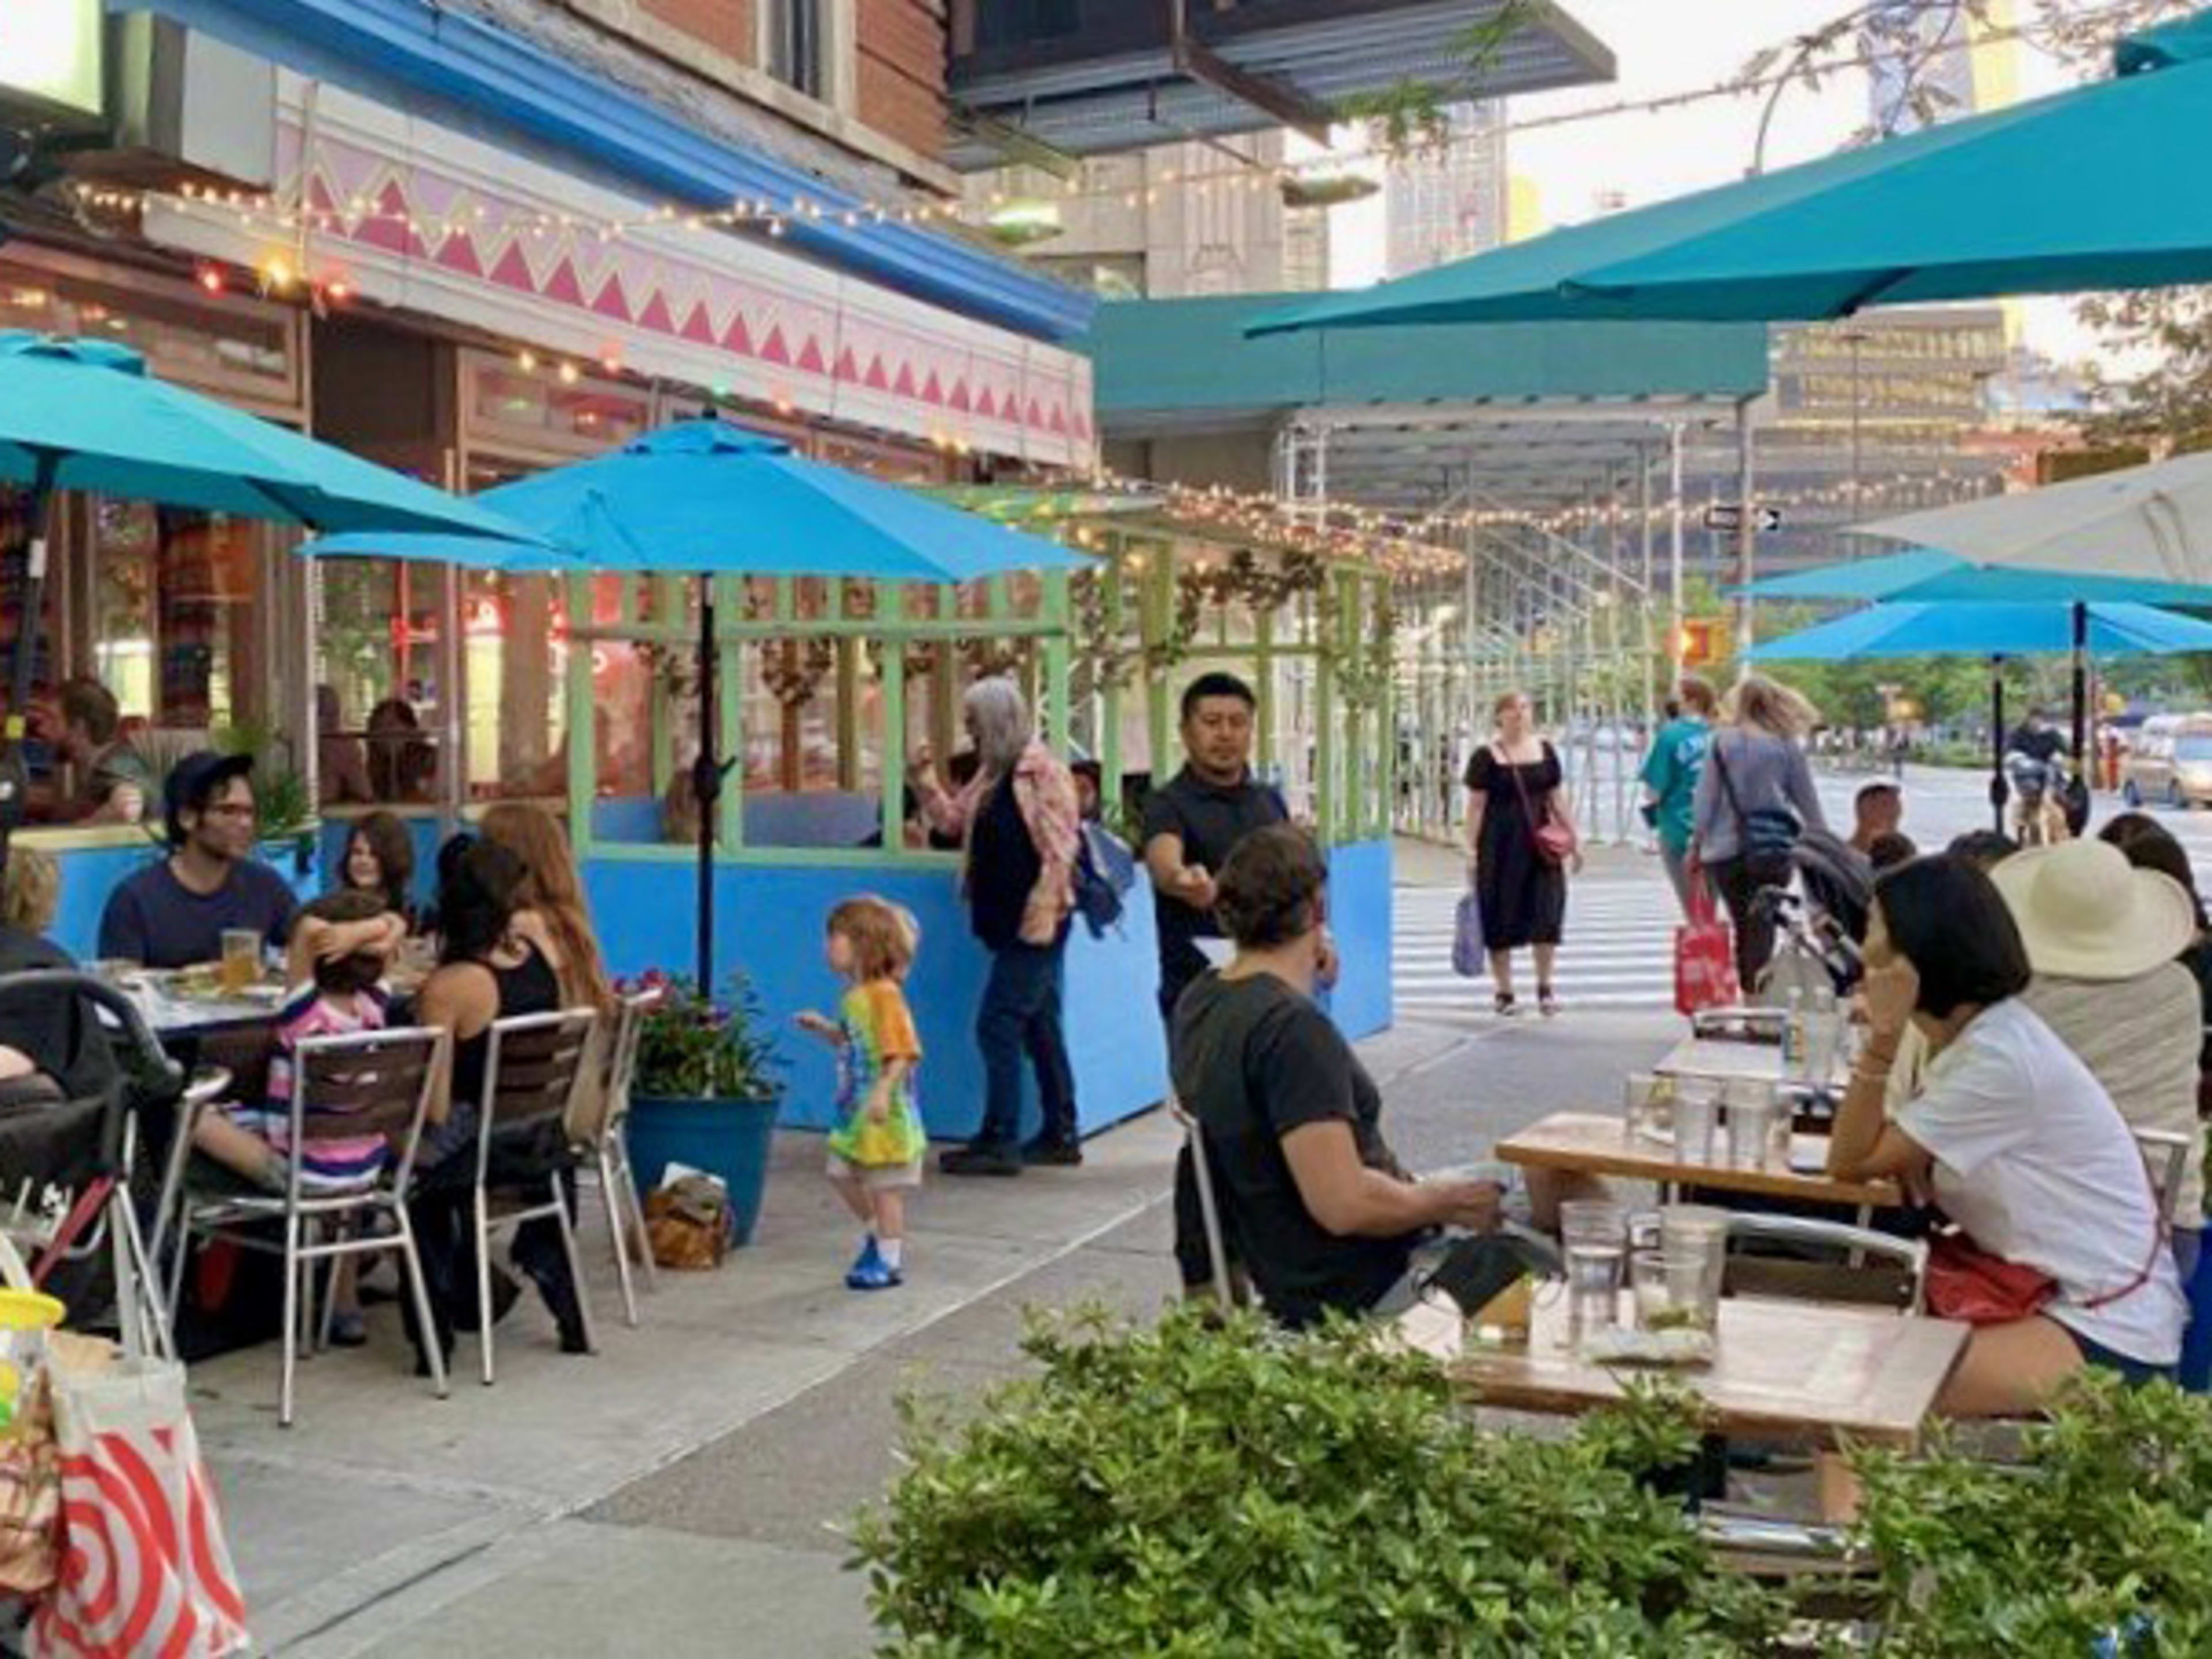 Lupe's East LA Kitchen exterior with outdoor sidewalk seating and umbrellas